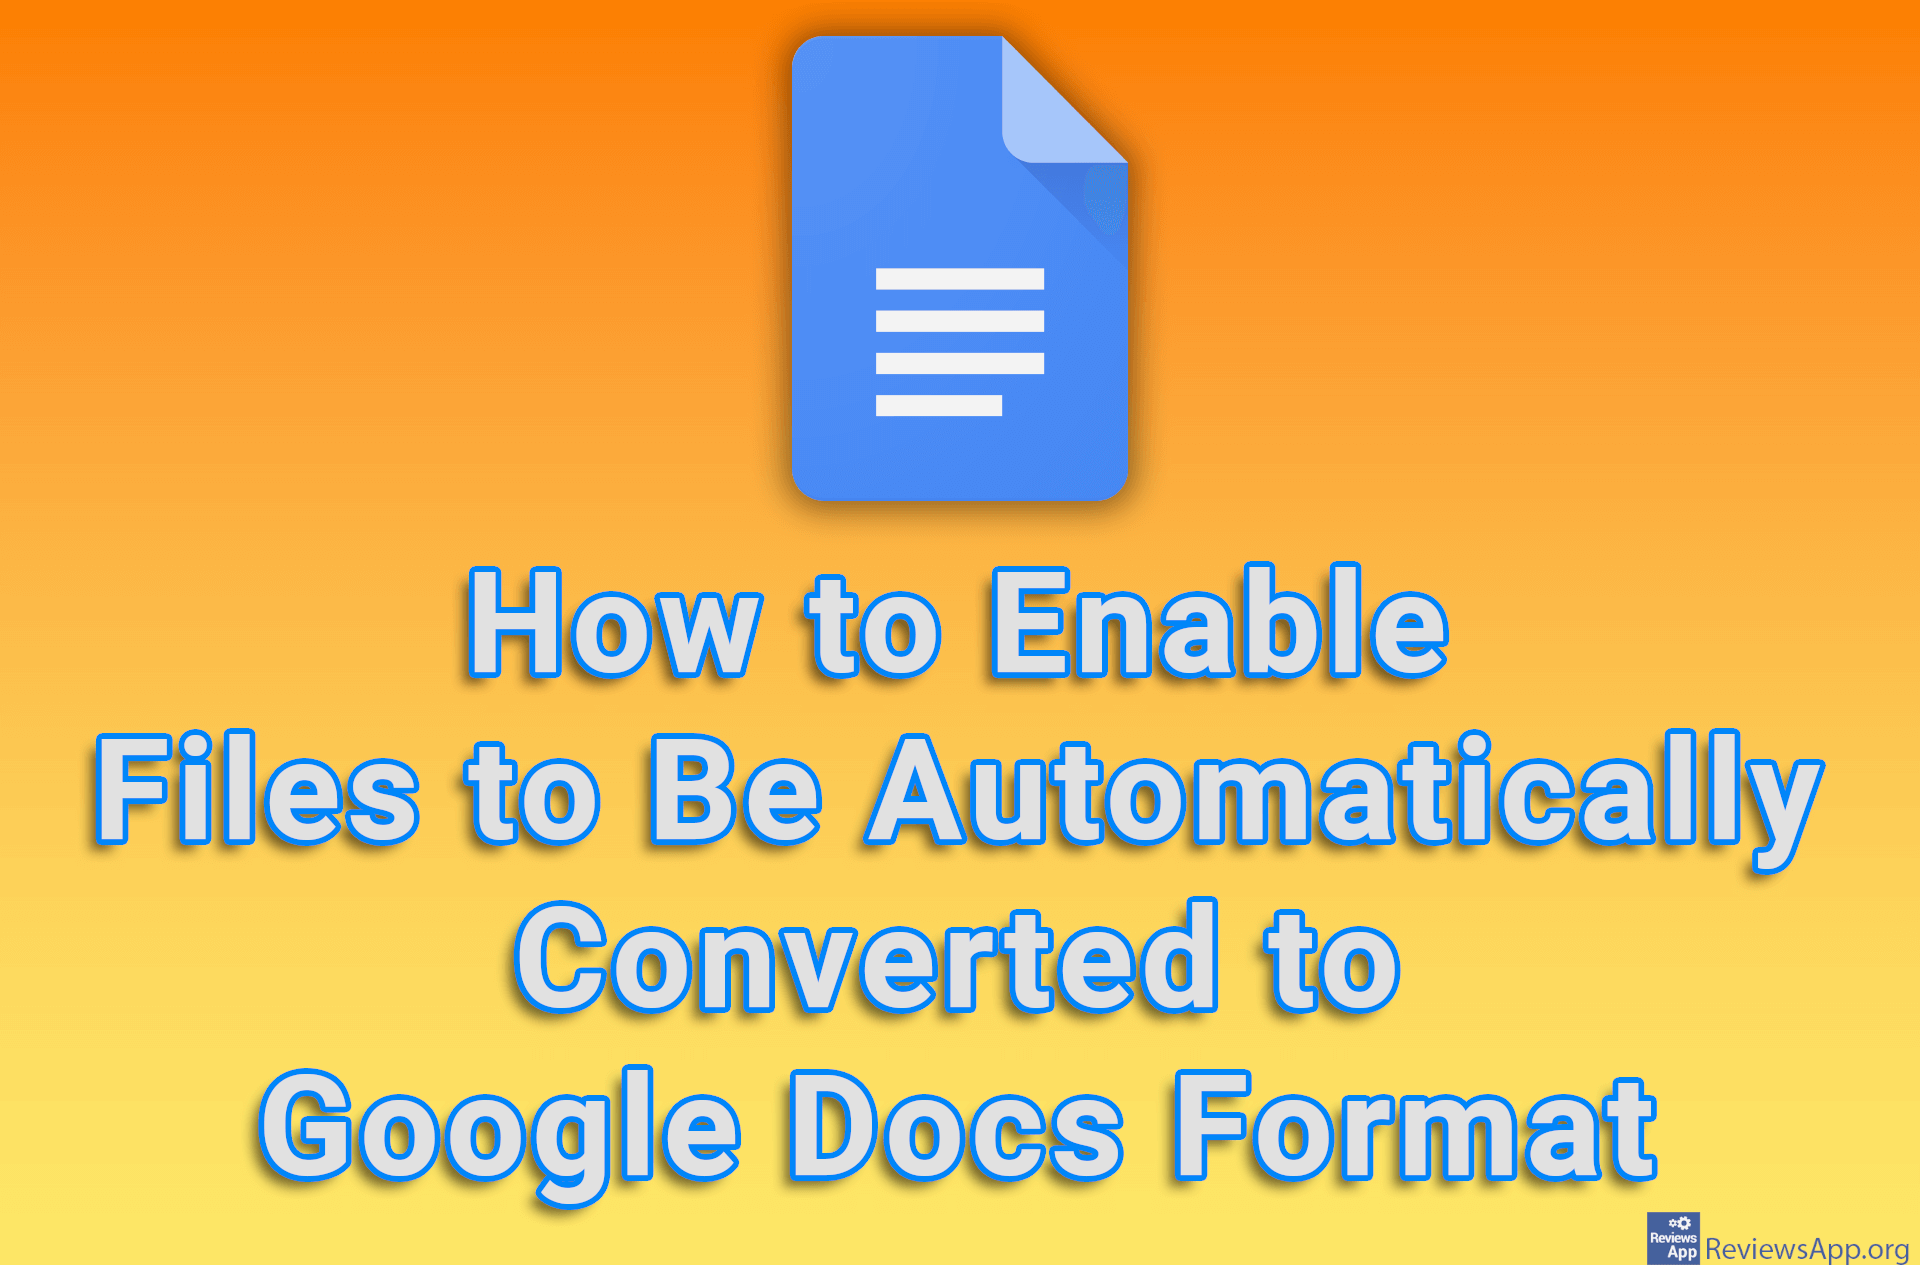 How to Enable Files to Be Automatically Converted to Google Docs Format